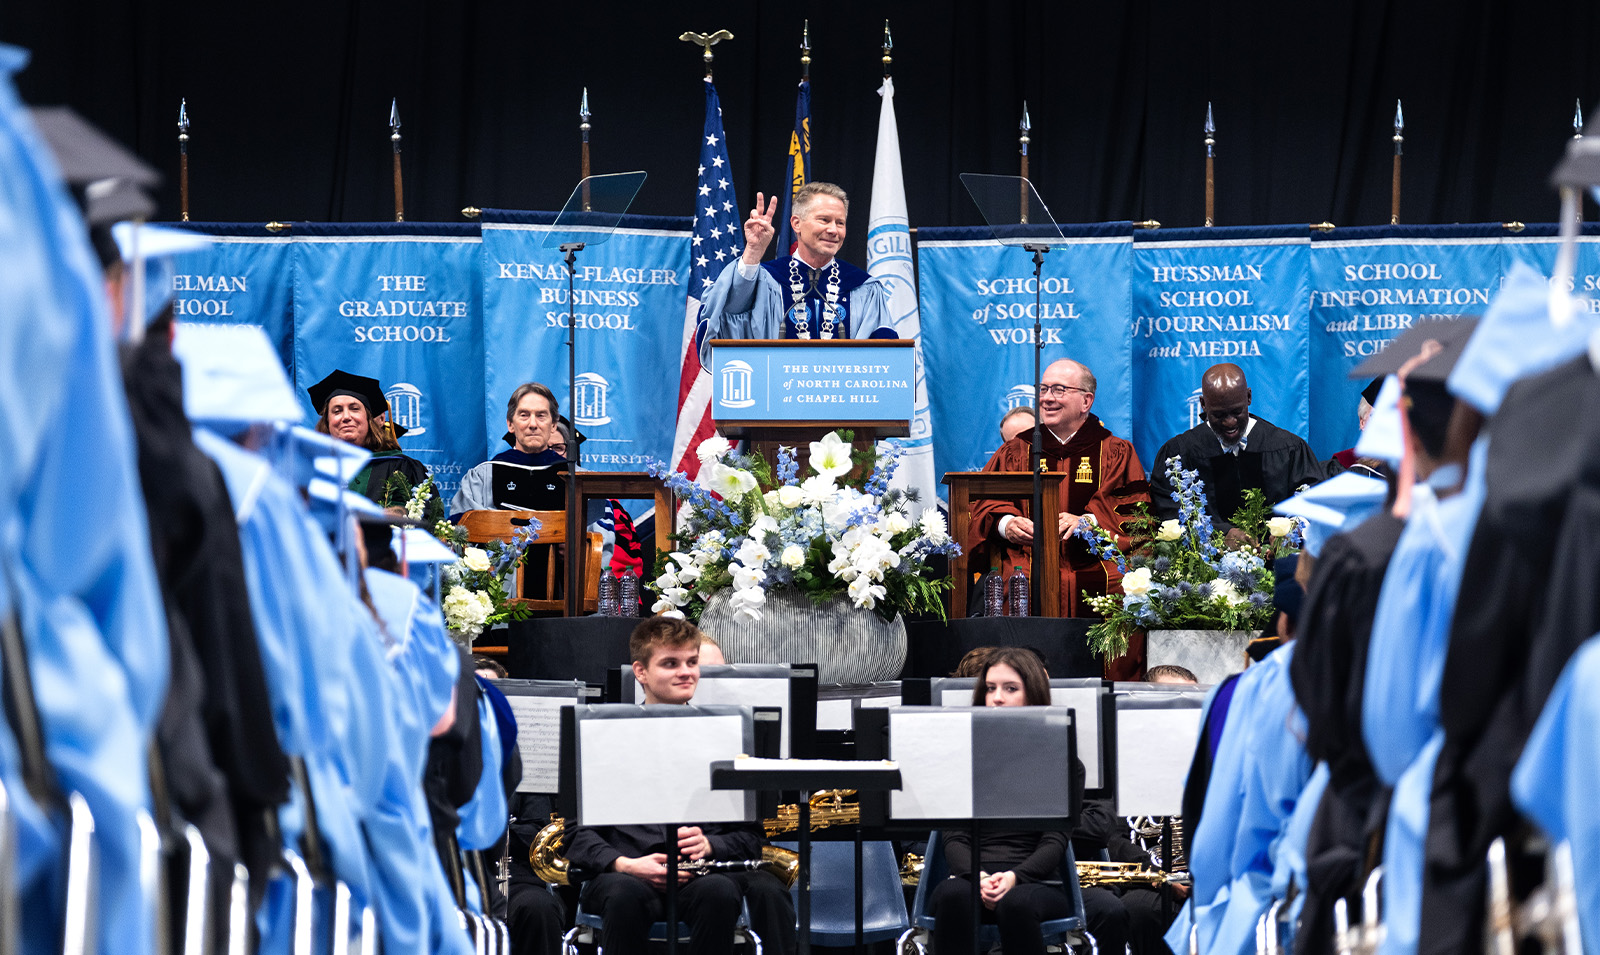 Chancellor Kevin M. Guskiewicz making a peace sign while speaking at Winter Commencement.